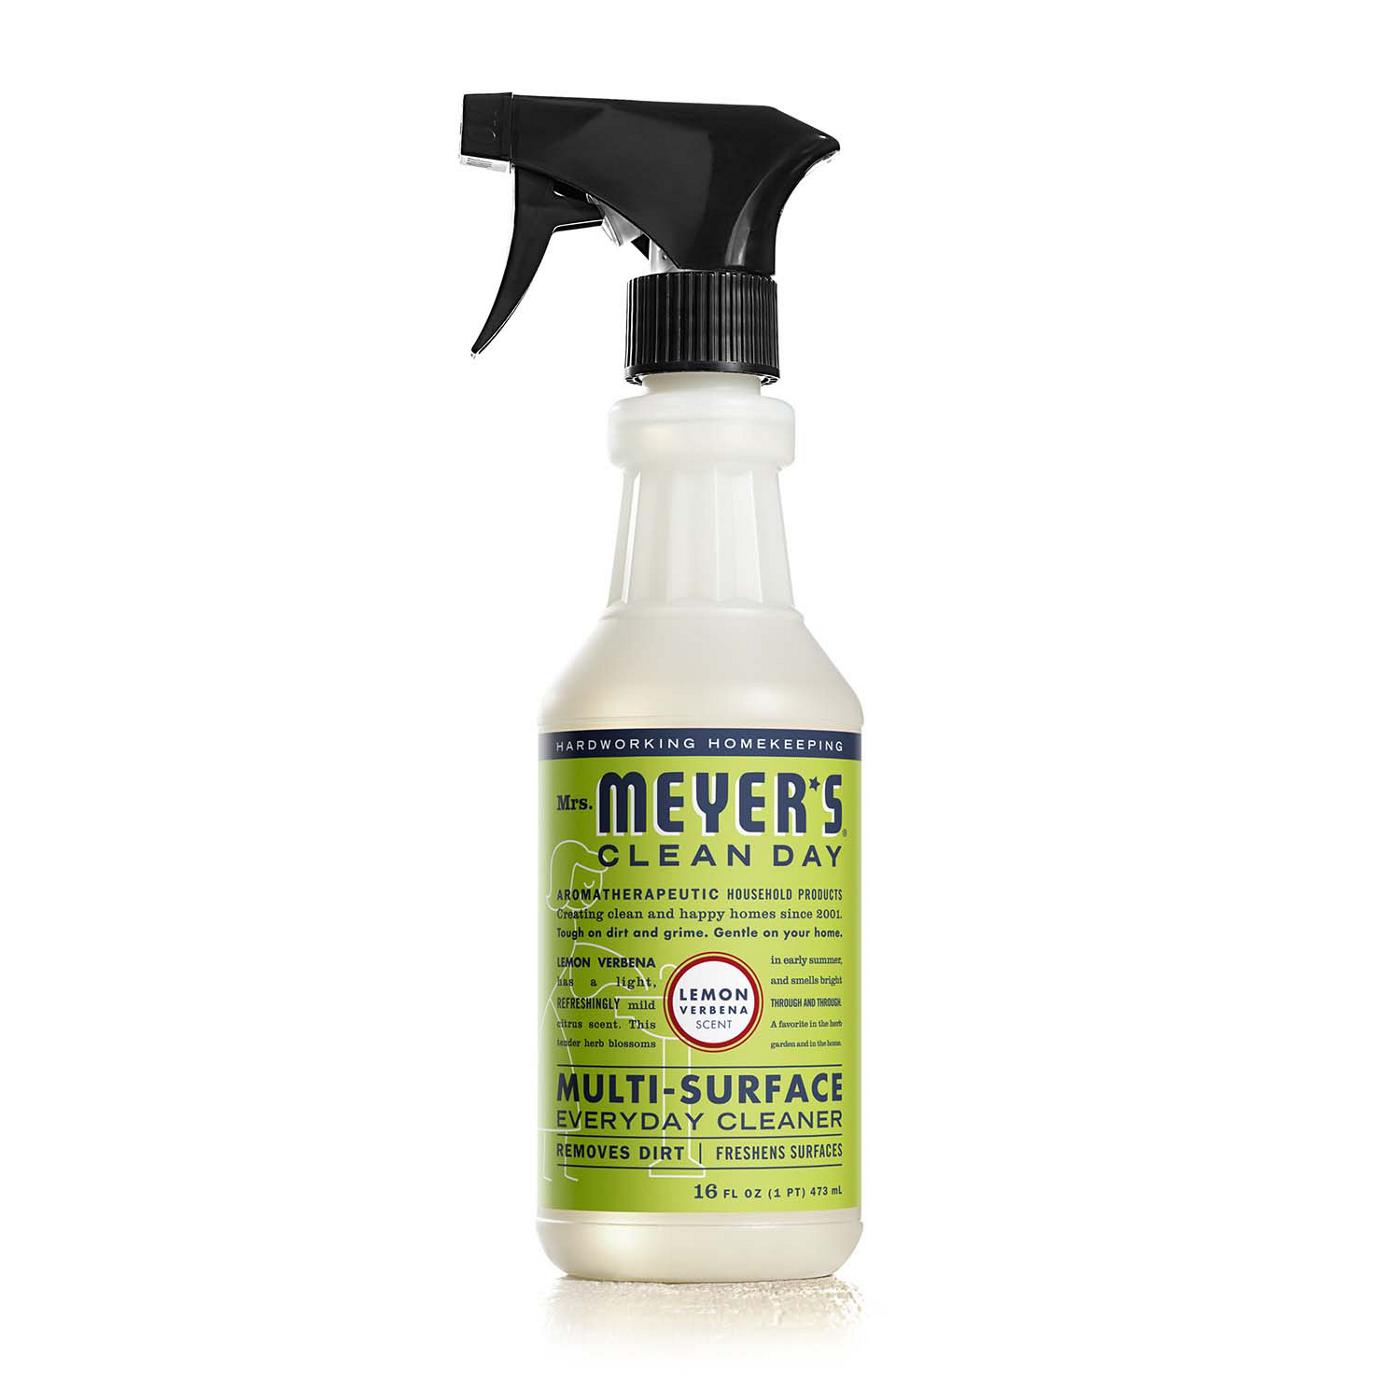 Mrs. Meyer's Clean Day Lemon Verbena Scent Multi-Surface Everyday Cleaner Spray; image 1 of 6